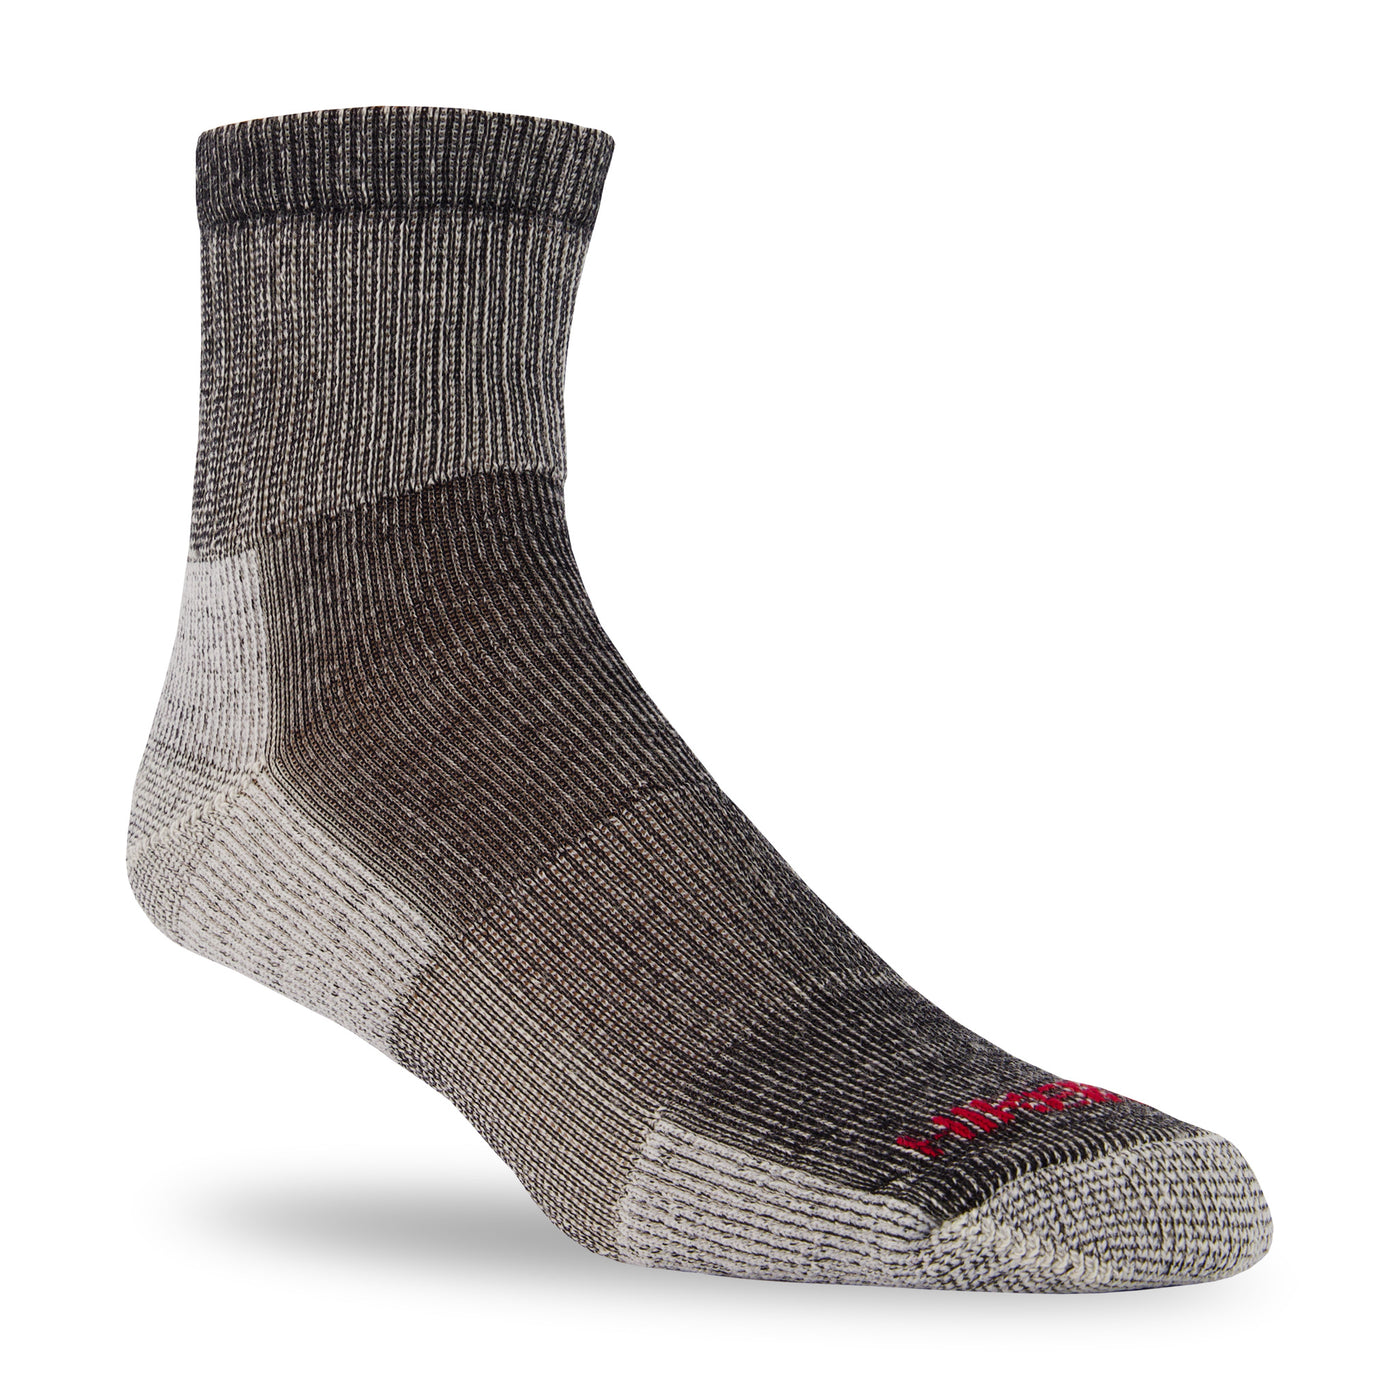 hiking ankle socks made in Canada